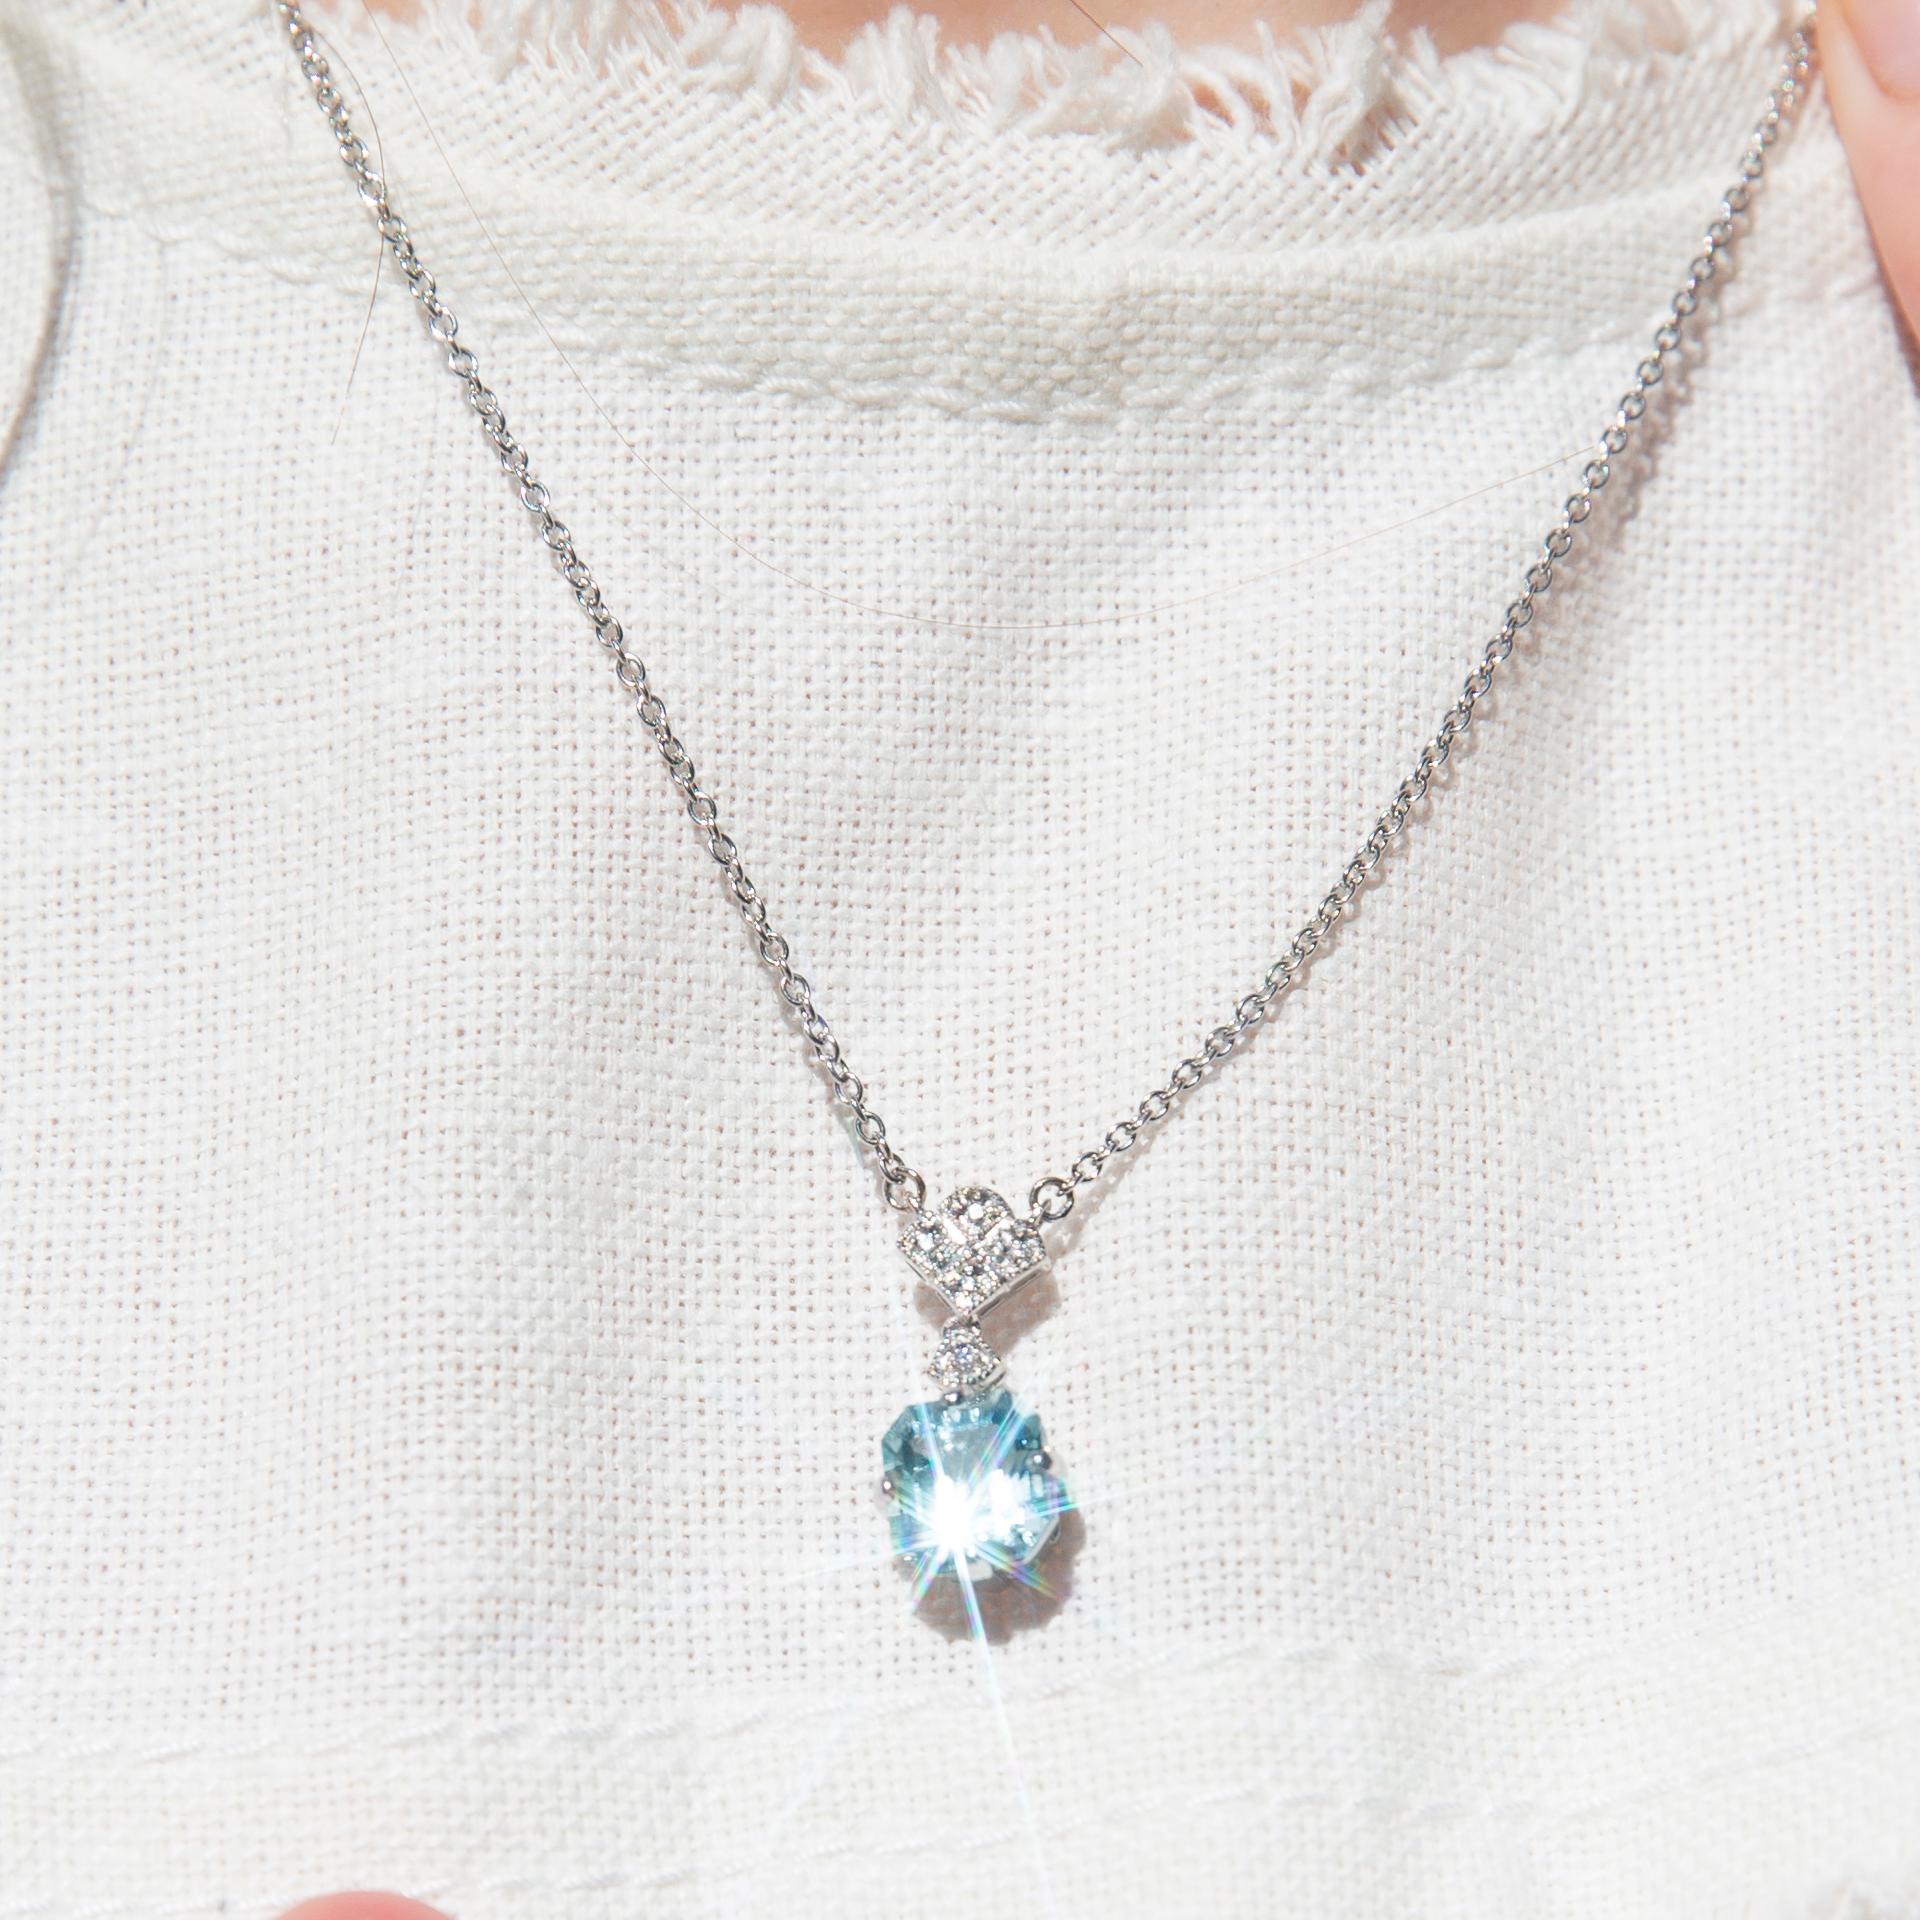 Crafted in platinum, this fabulous contemporary adornment features a stunning emerald cut aquamarine in a claw setting and articulating from a a diamond-shaped bail set with shimmering diamonds and threaded with a fine chain. The Kailani Pendant &